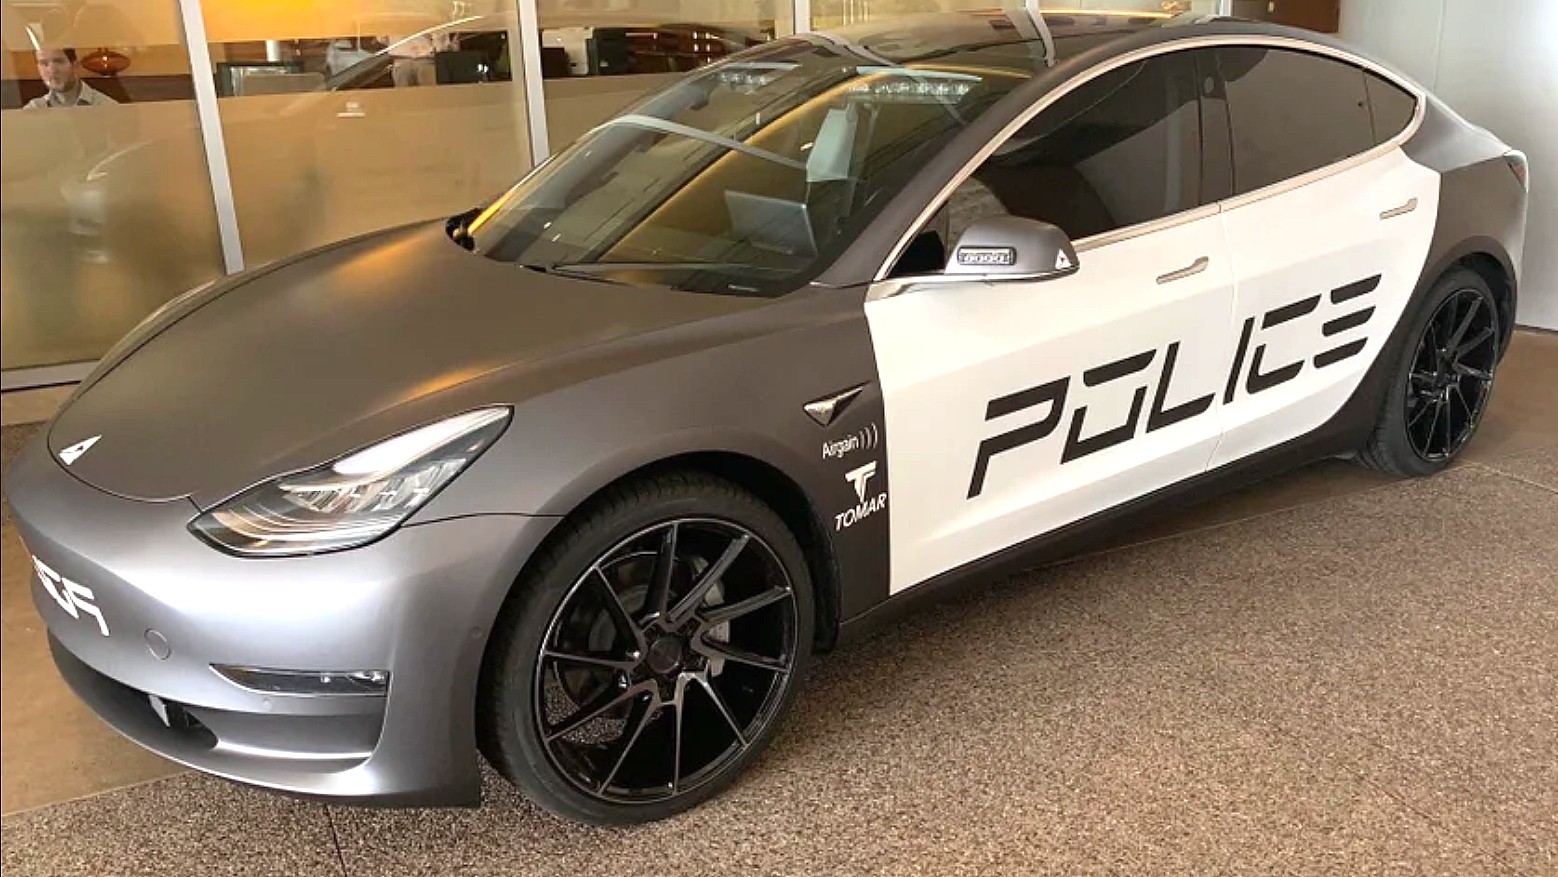 Tesla Model 3 police car makes an appearance at law enforcement tech conference